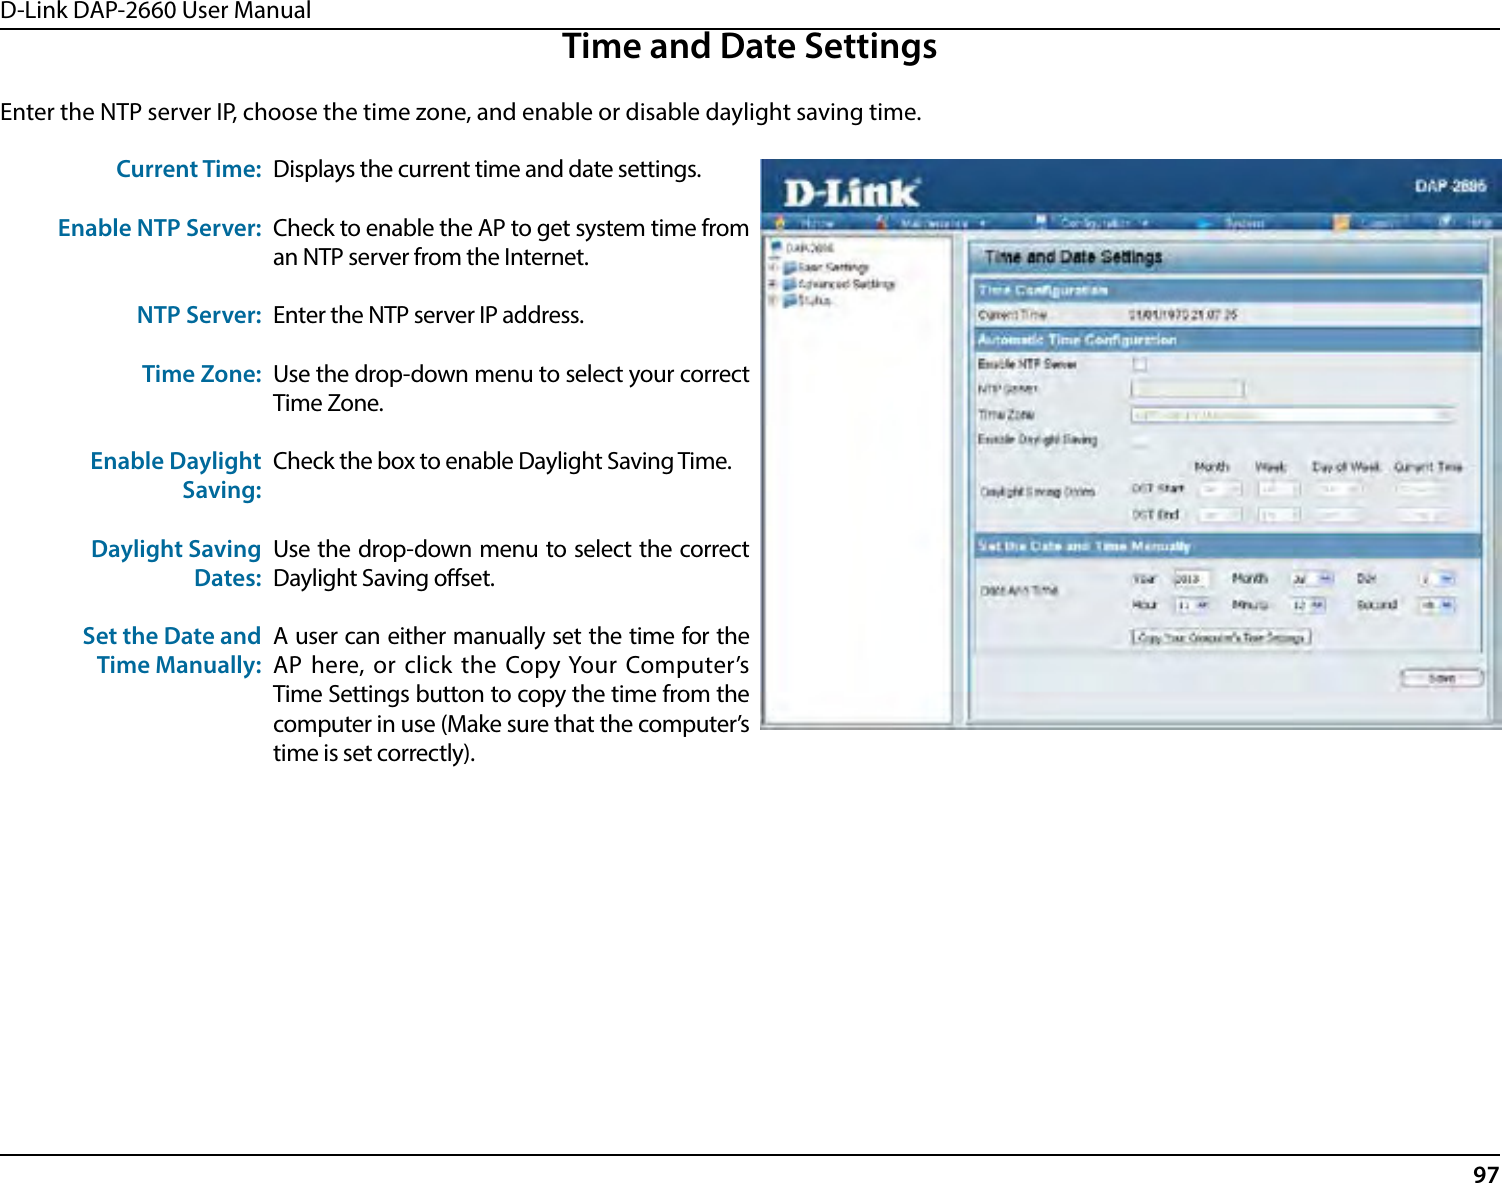 D-Link DAP-2660 User Manual97Time and Date SettingsEnter the NTP server IP, choose the time zone, and enable or disable daylight saving time.Current Time:Enable NTP Server:NTP Server:Time Zone:Enable DaylightSaving:Daylight SavingDates:Set the Date andTime Manually:Displays the current time and date settings.Check to enable the AP to get system time from an NTP server from the Internet.Enter the NTP server IP address.Use the drop-down menu to select your correct Time Zone.Check the box to enable Daylight Saving Time.Use the drop-down menu to select the correct Daylight Saving oset.A user can either manually set the time for the AP here, or click the Copy Your Computer’s Time Settings button to copy the time from the computer in use (Make sure that the computer’s time is set correctly).